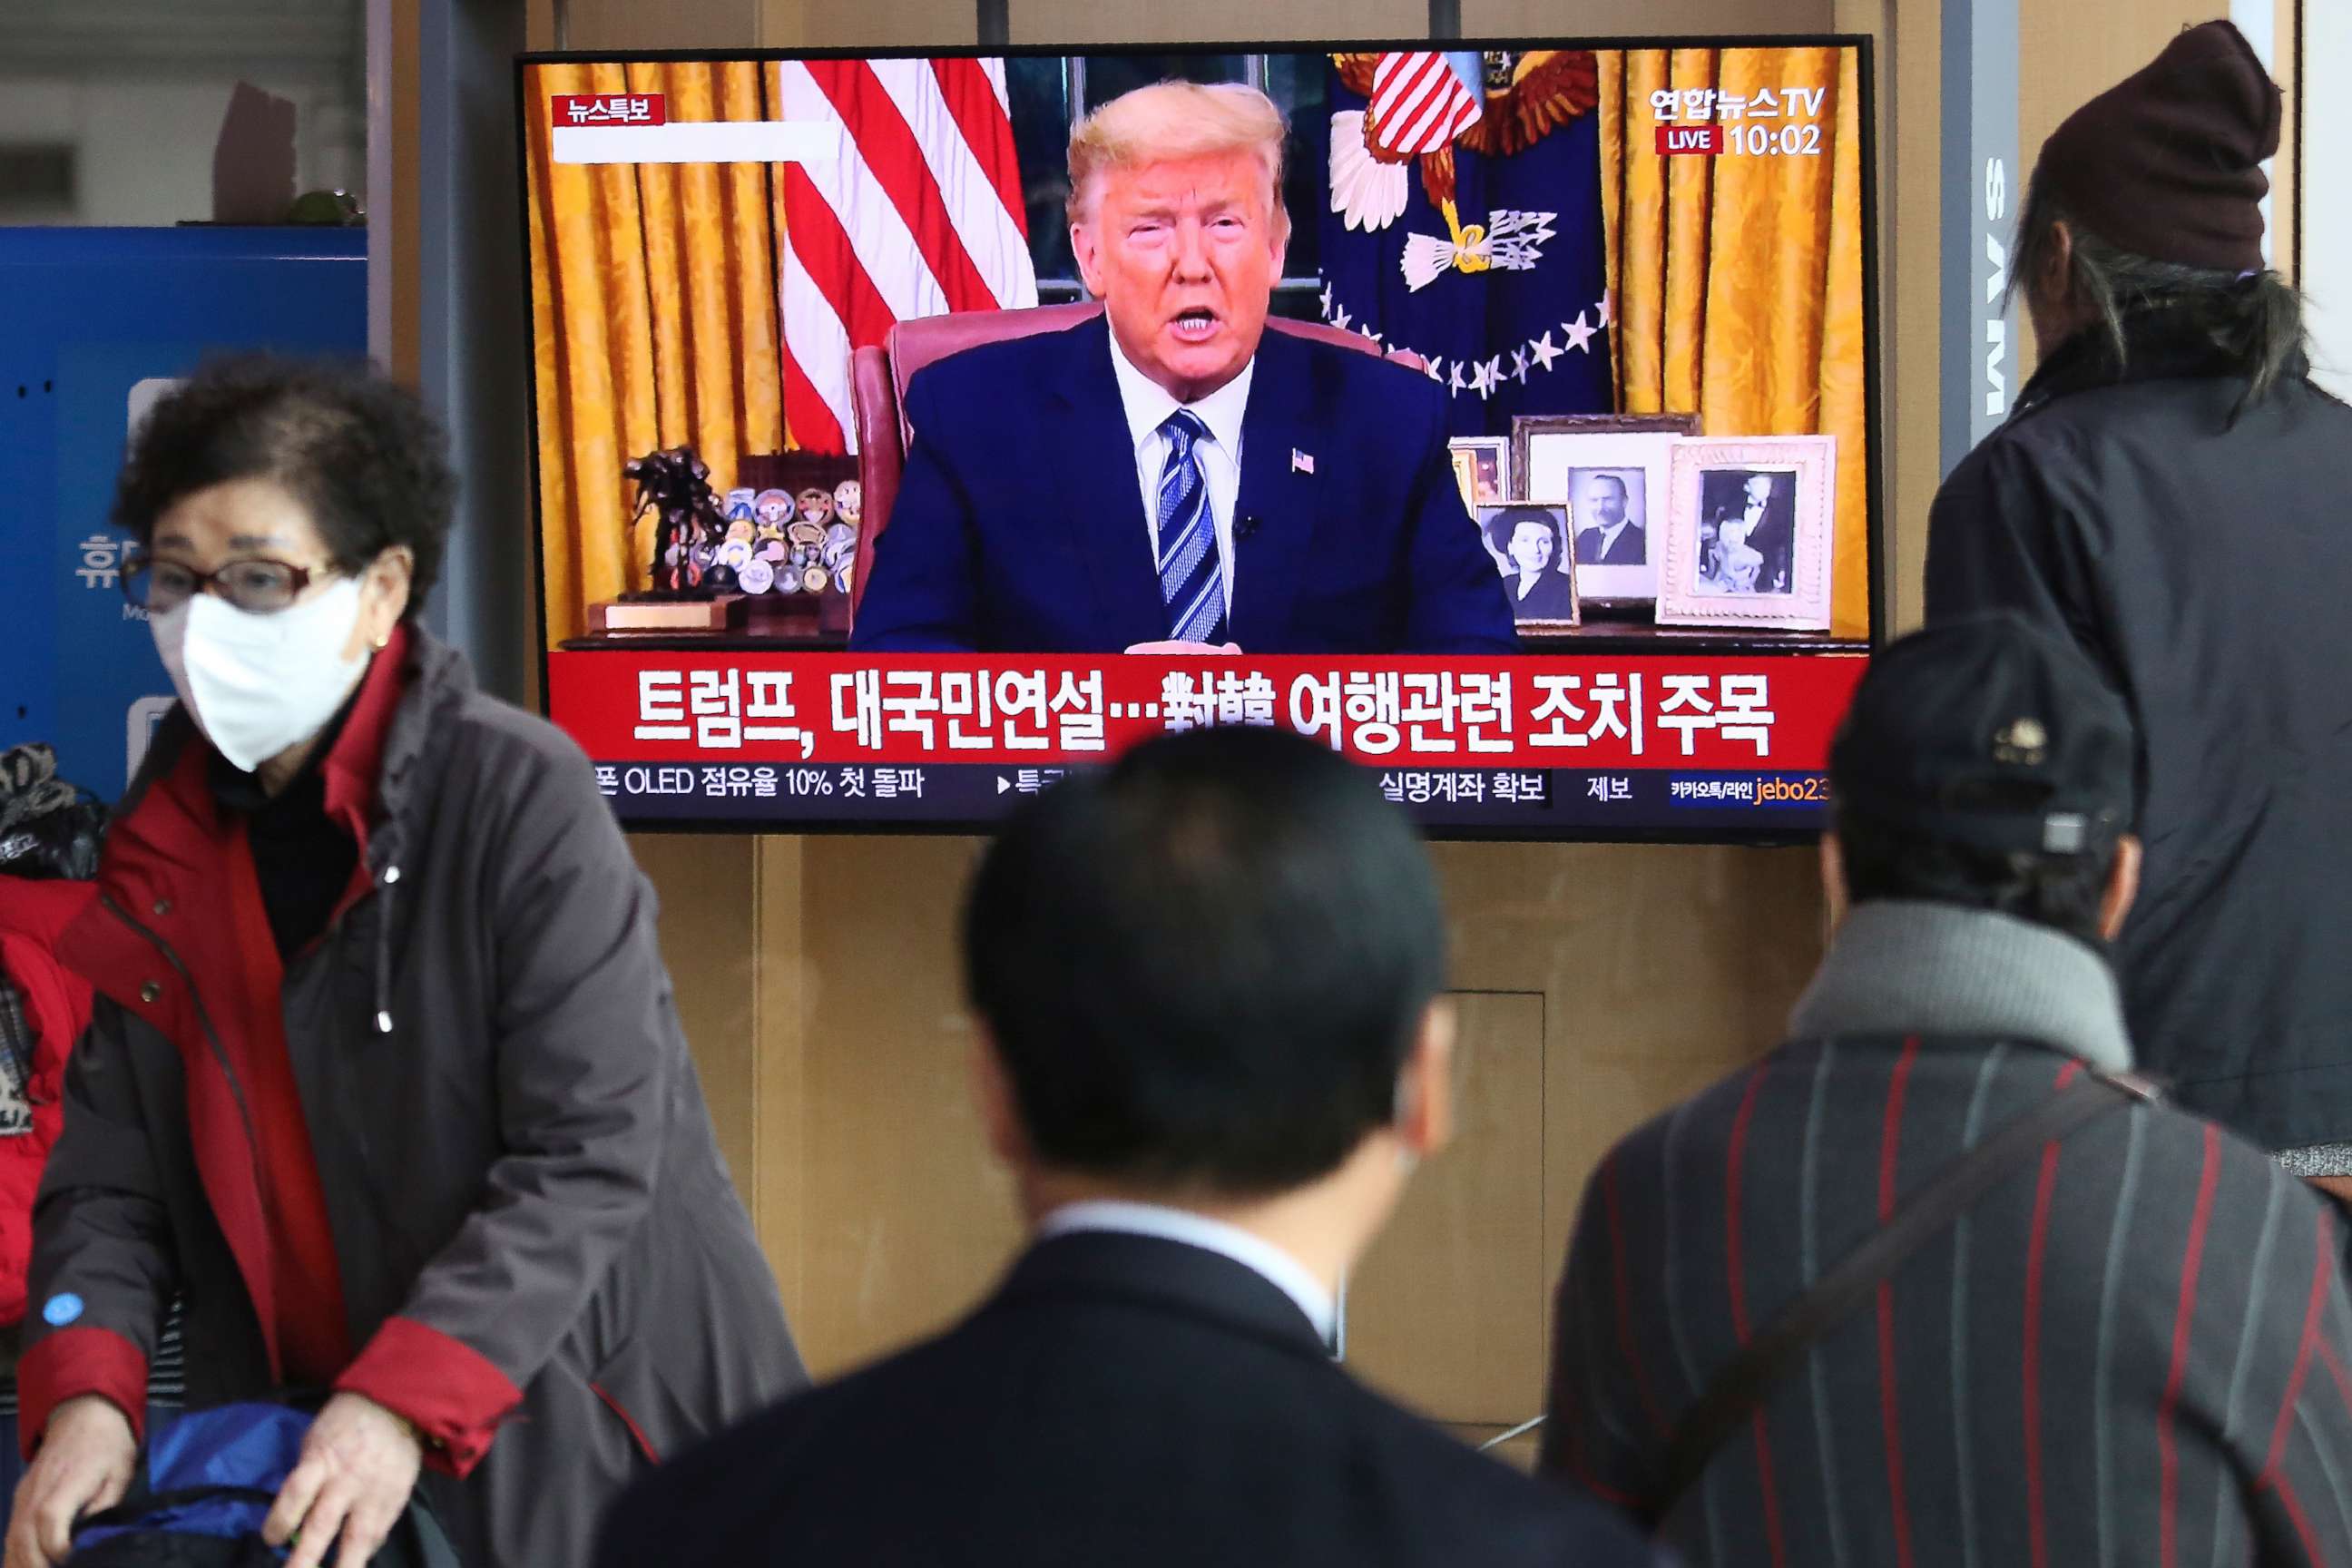 PHOTO: People watch a TV screen showing a live broadcast of U.S. President Donald Trump's speech at the Seoul Railway Station in Seoul, South Korea, Thursday, March 12, 2020. Trump announced he is cutting off travel from Europe to the U.S.